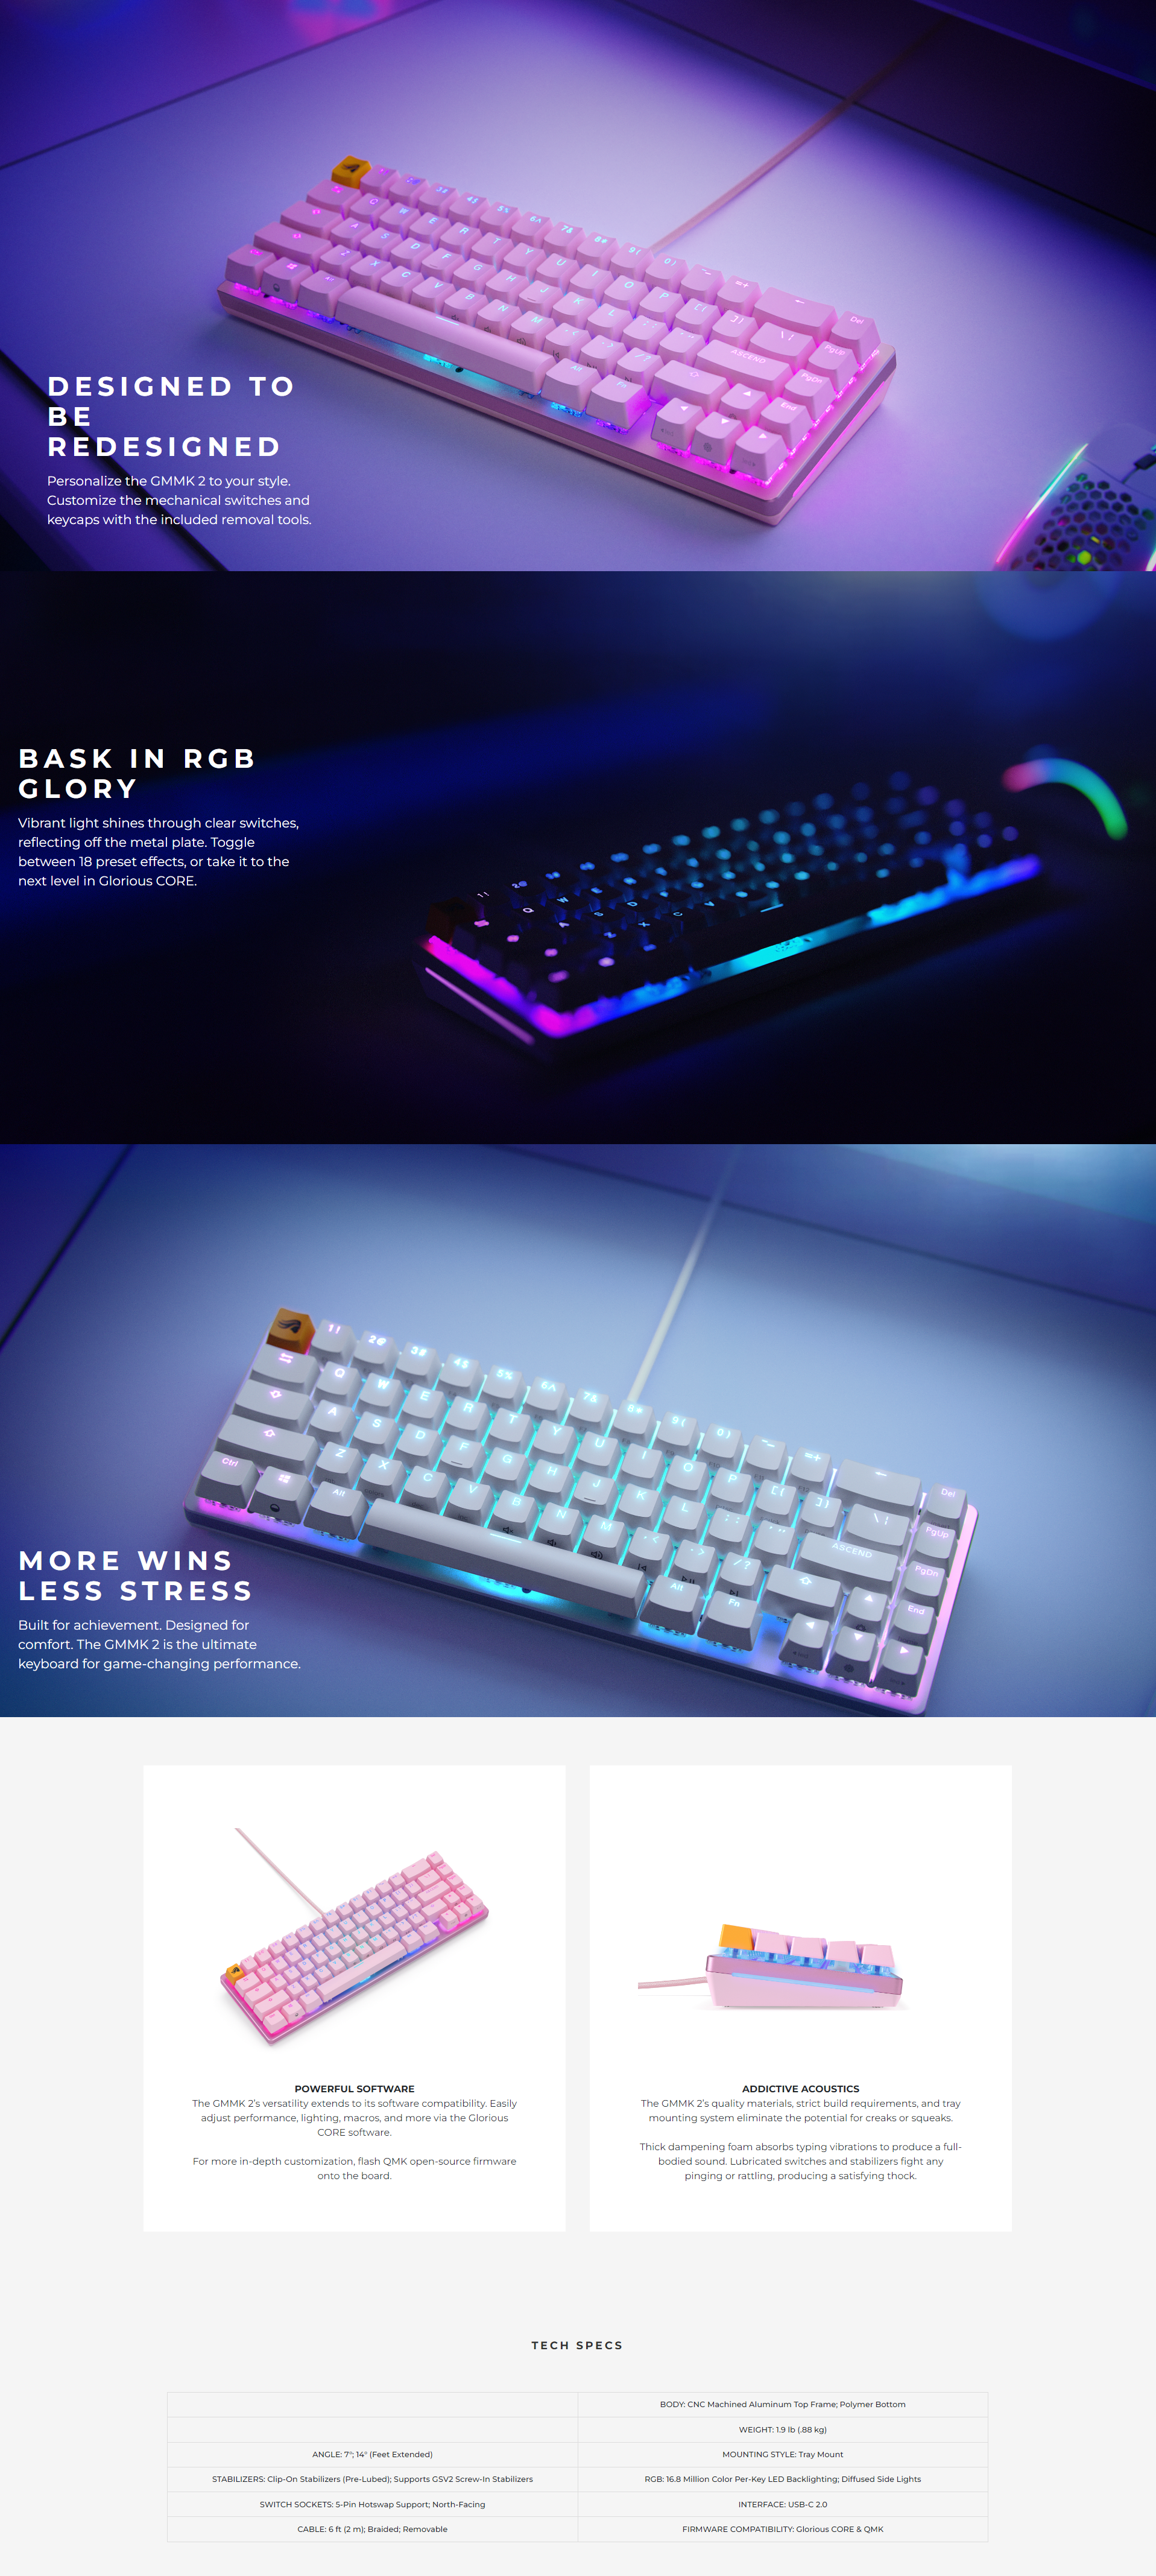 A large marketing image providing additional information about the product Glorious GMMK 2 Full Size Mechanical Keyboard - Pink (Barebones) - Additional alt info not provided